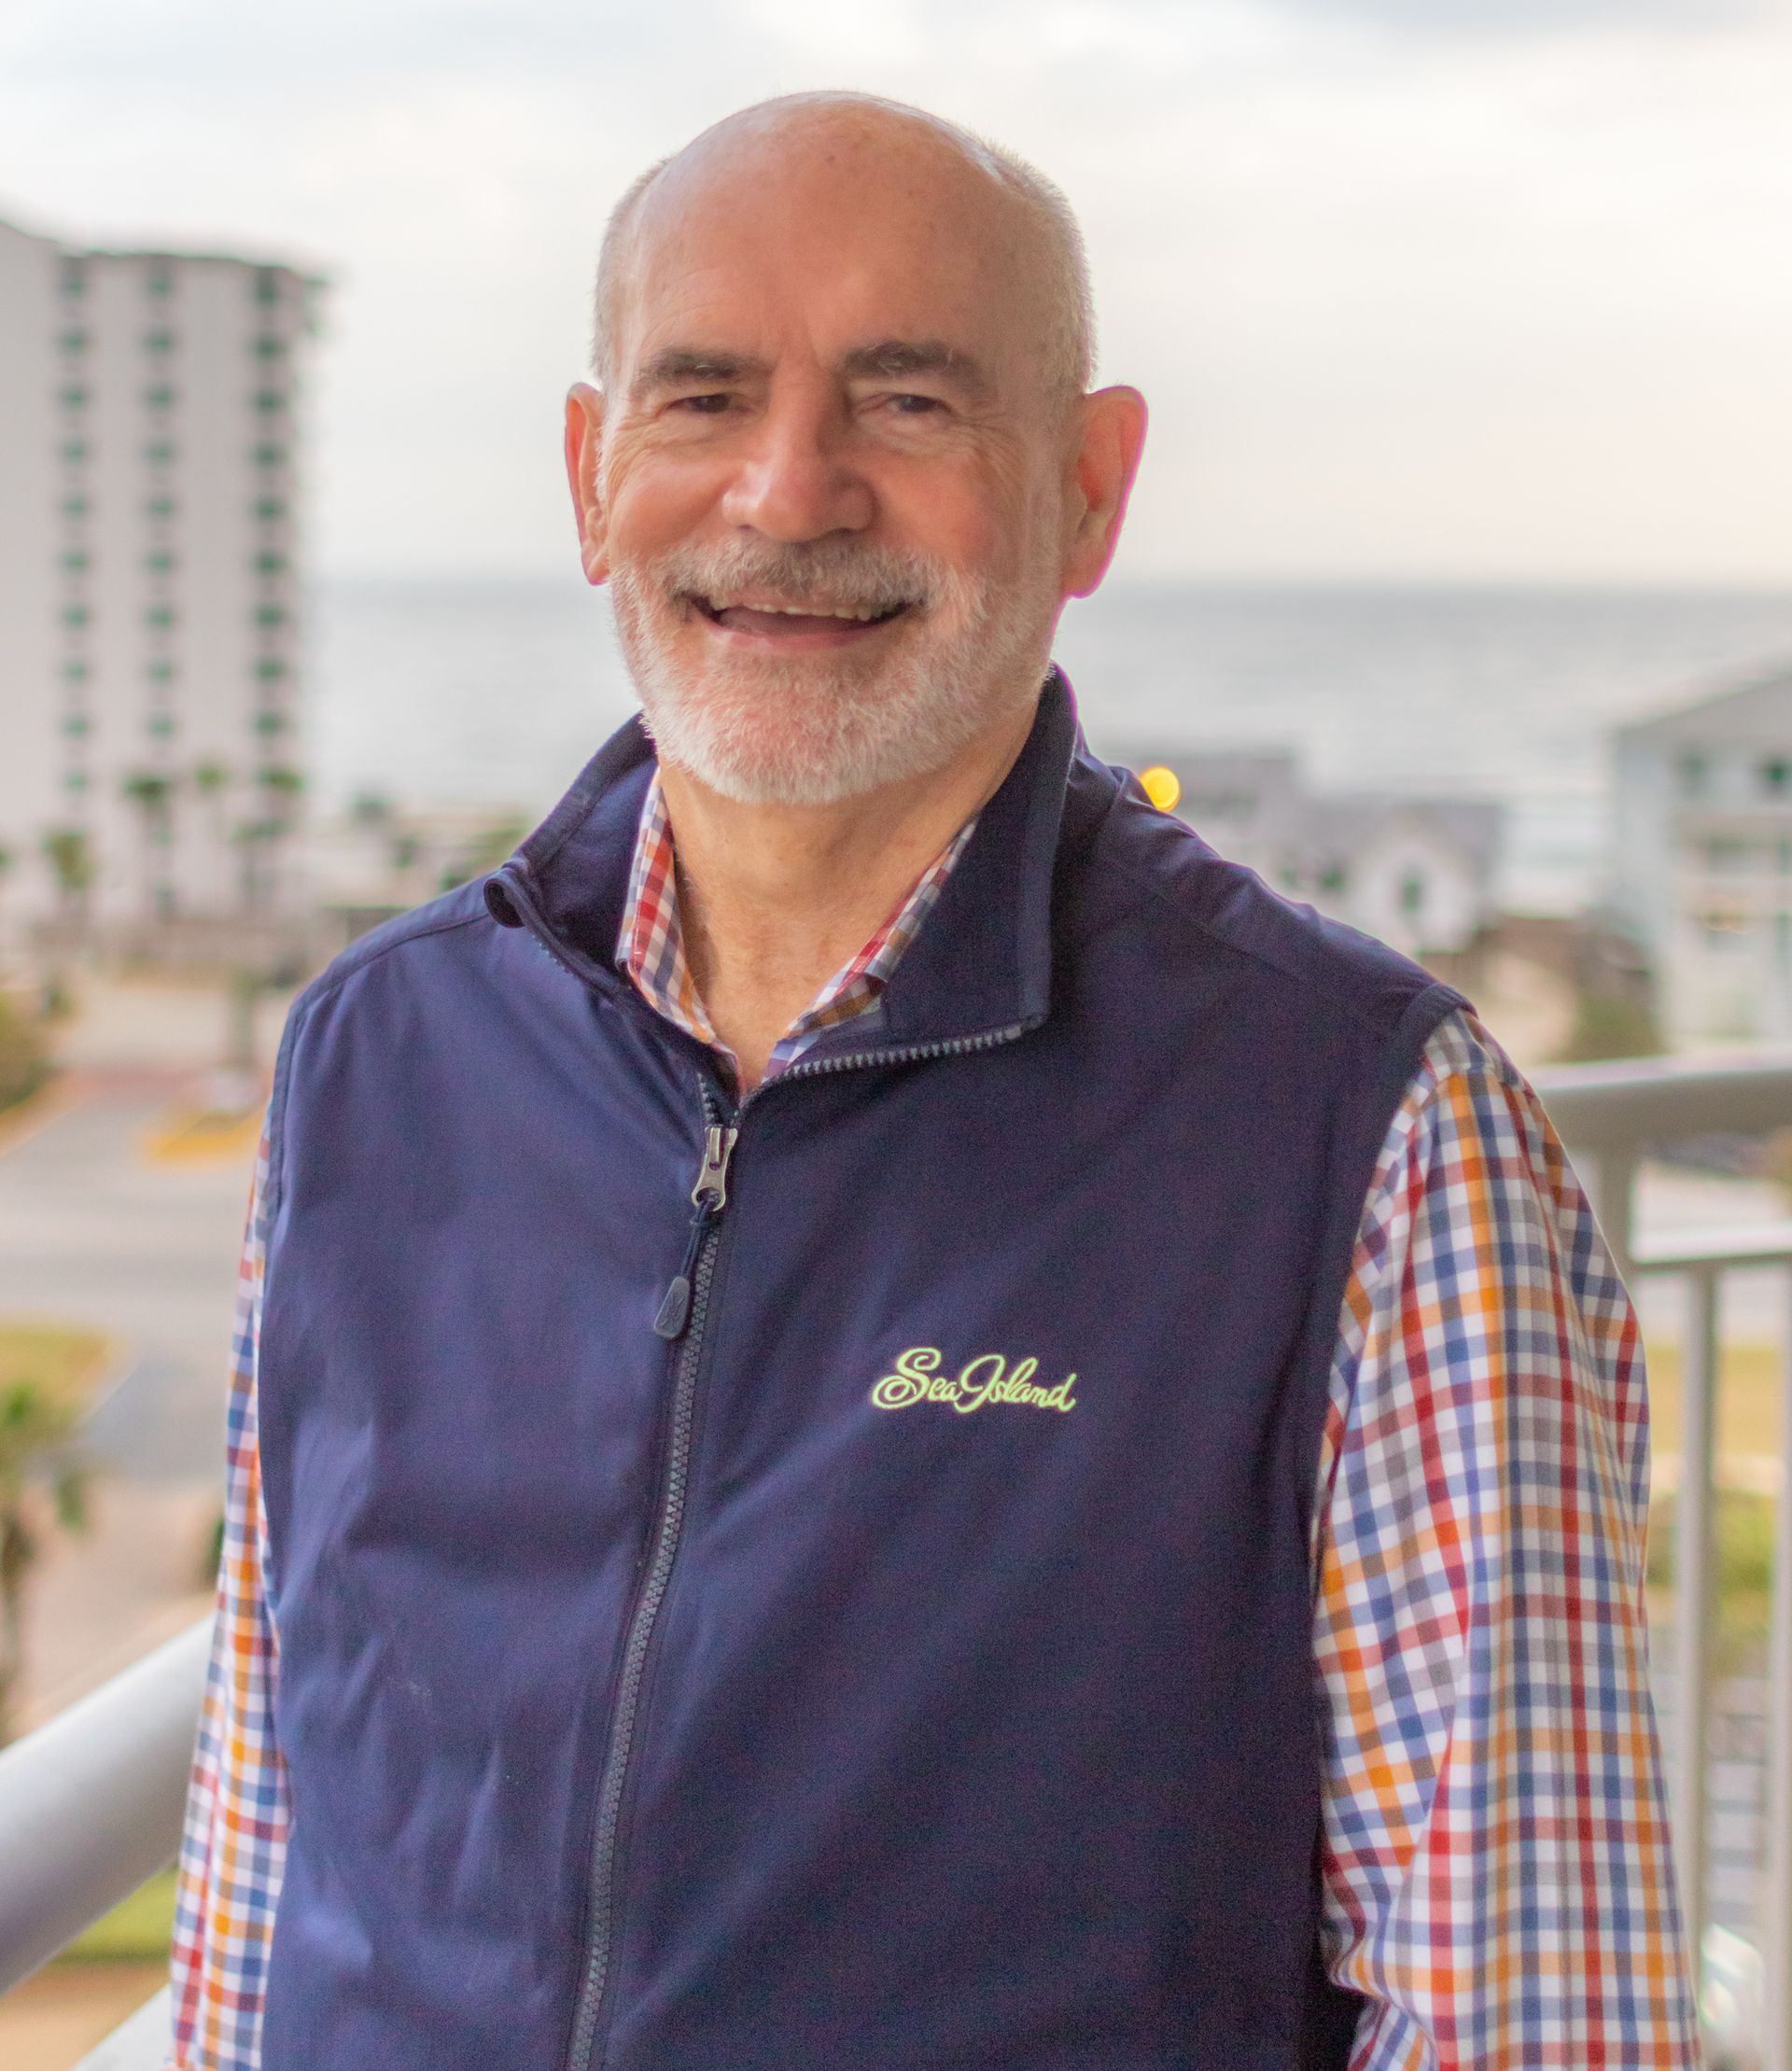 Gary Ellis of Gulf Shores was named as a board member to the Alabama Parkinson's Association.